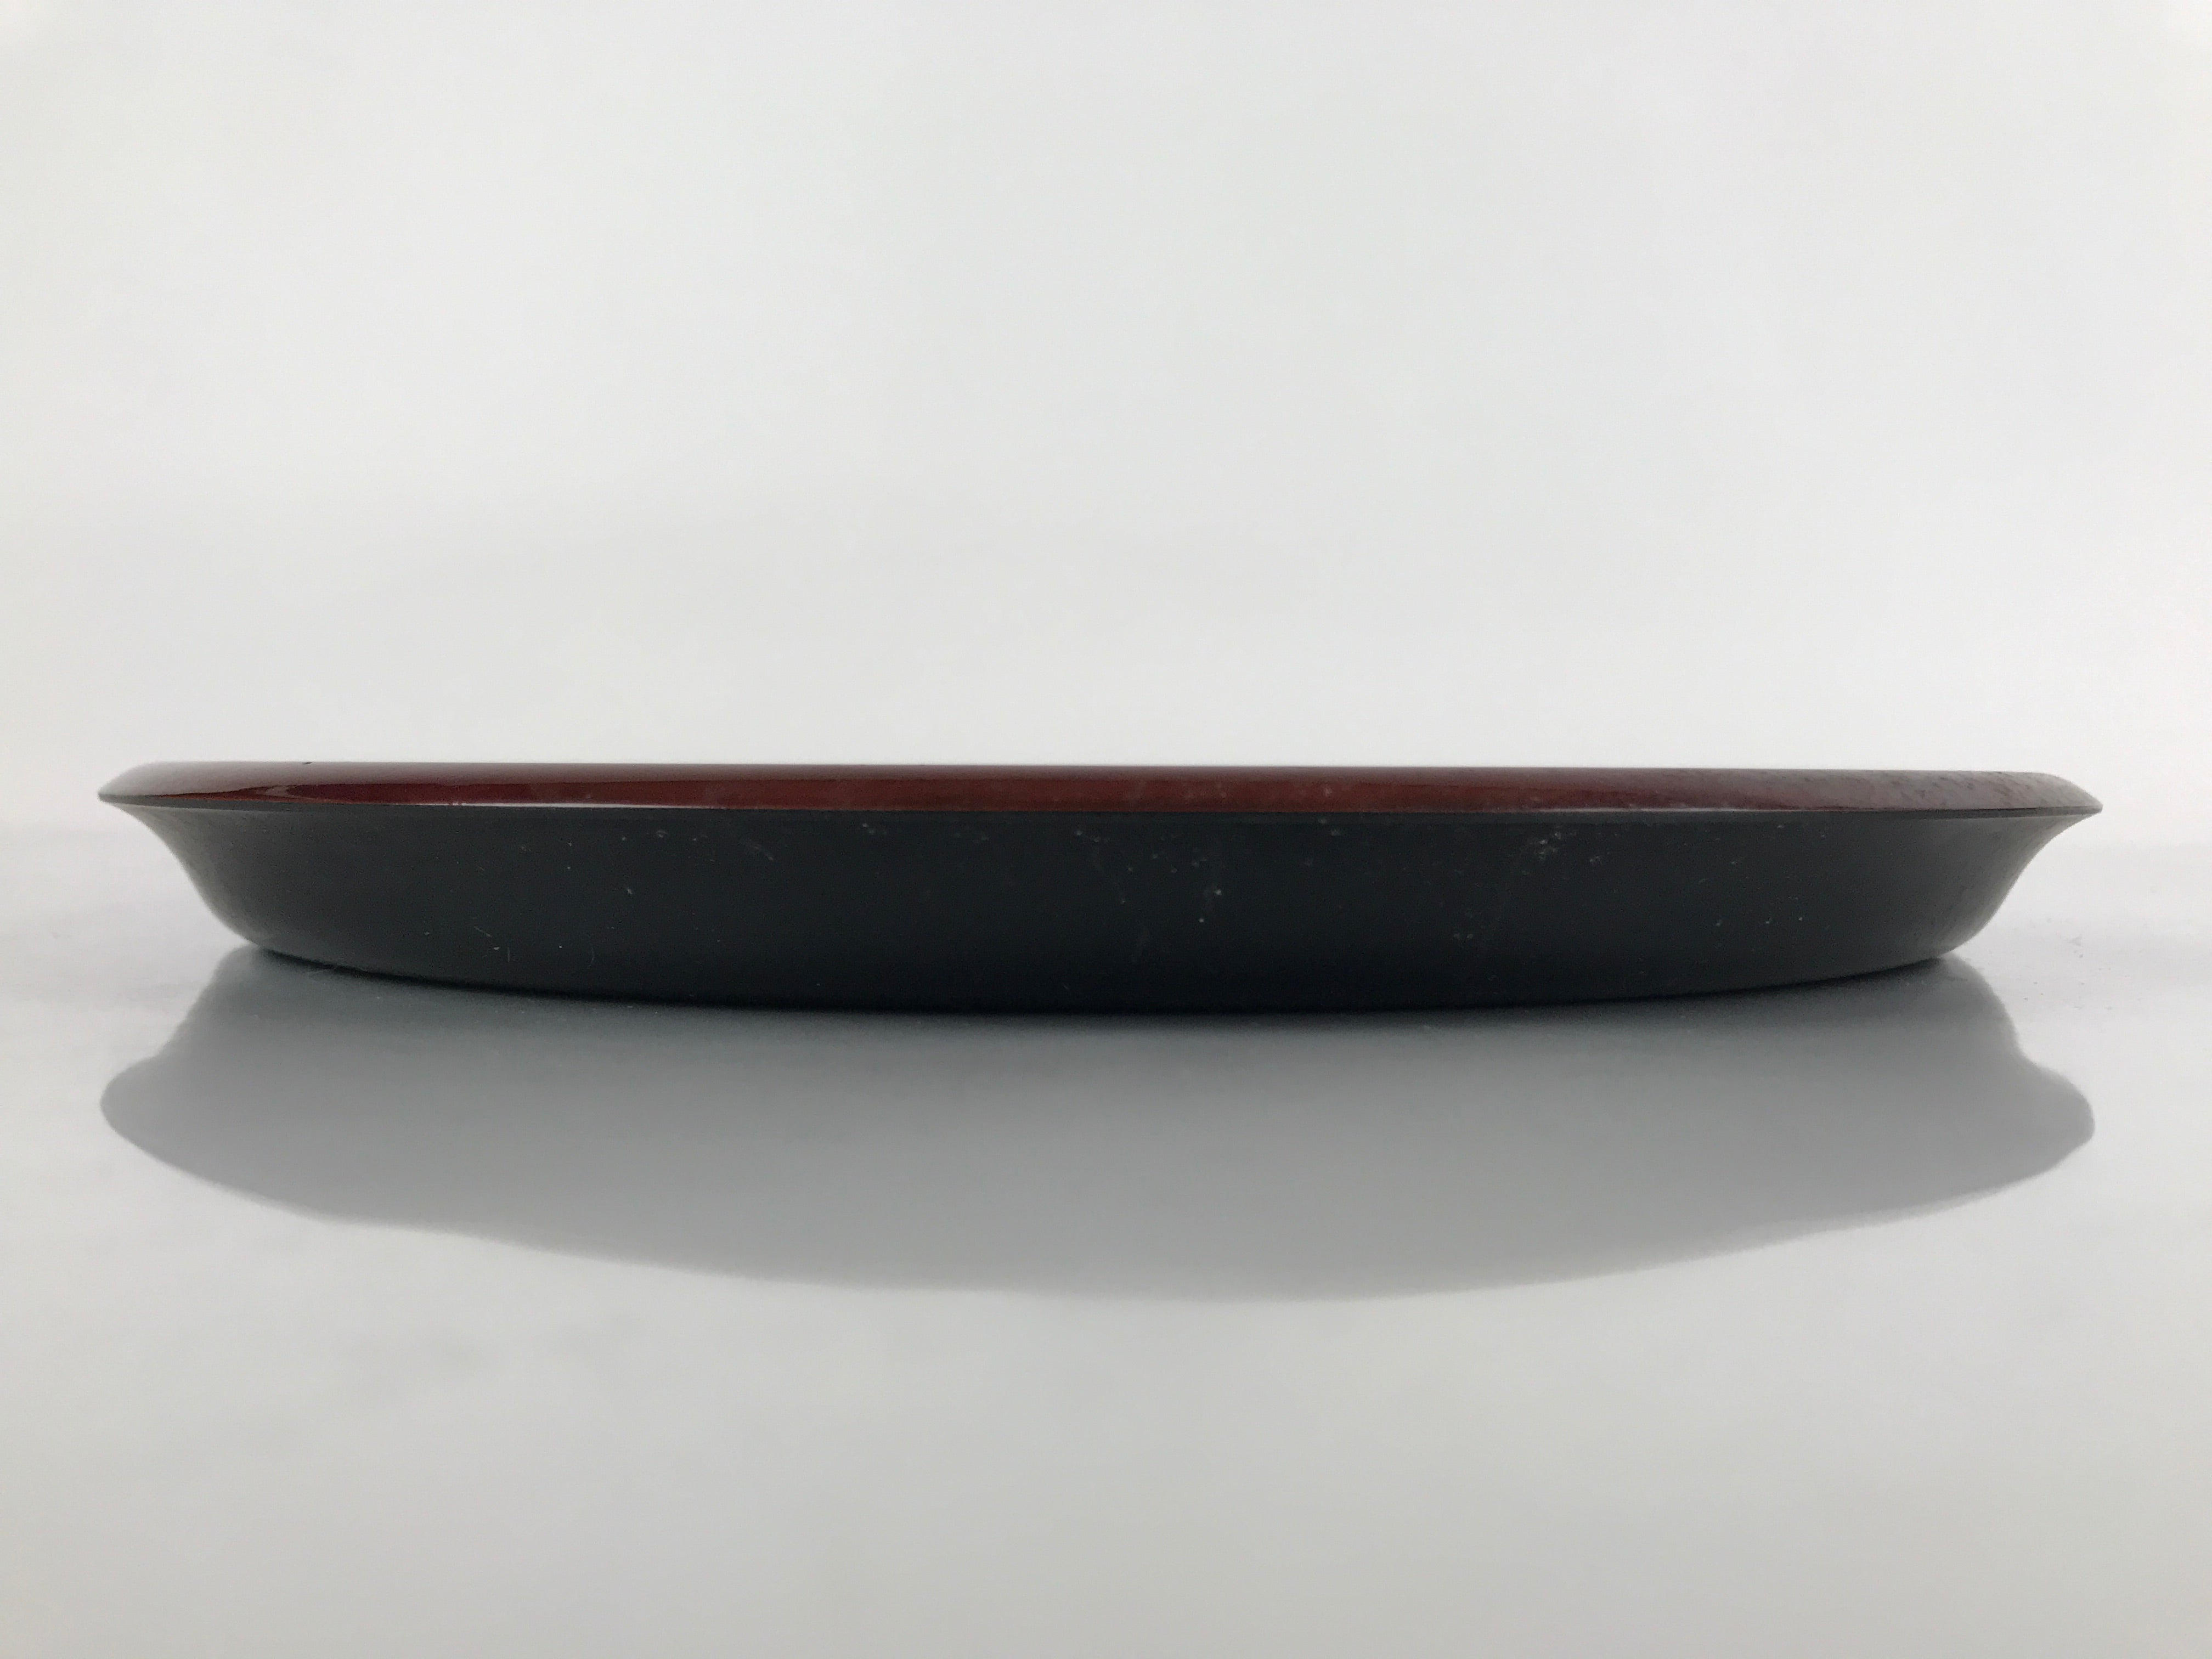 Japanese Lacquer Replica Resin Serving Tray Vtg Small Round Obon Brown L149